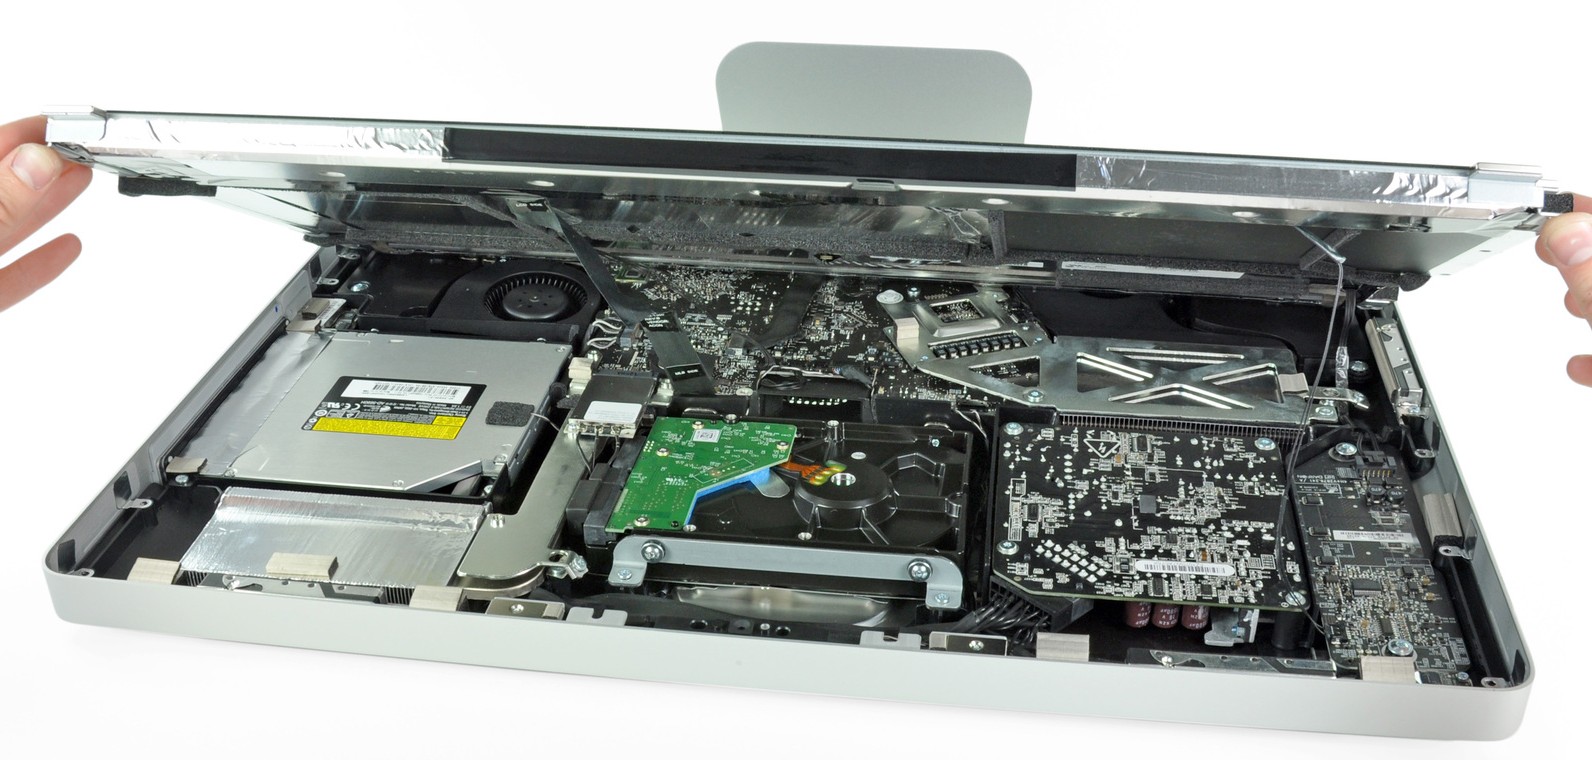 iMac reveals LG swappable optical mounted SSD -